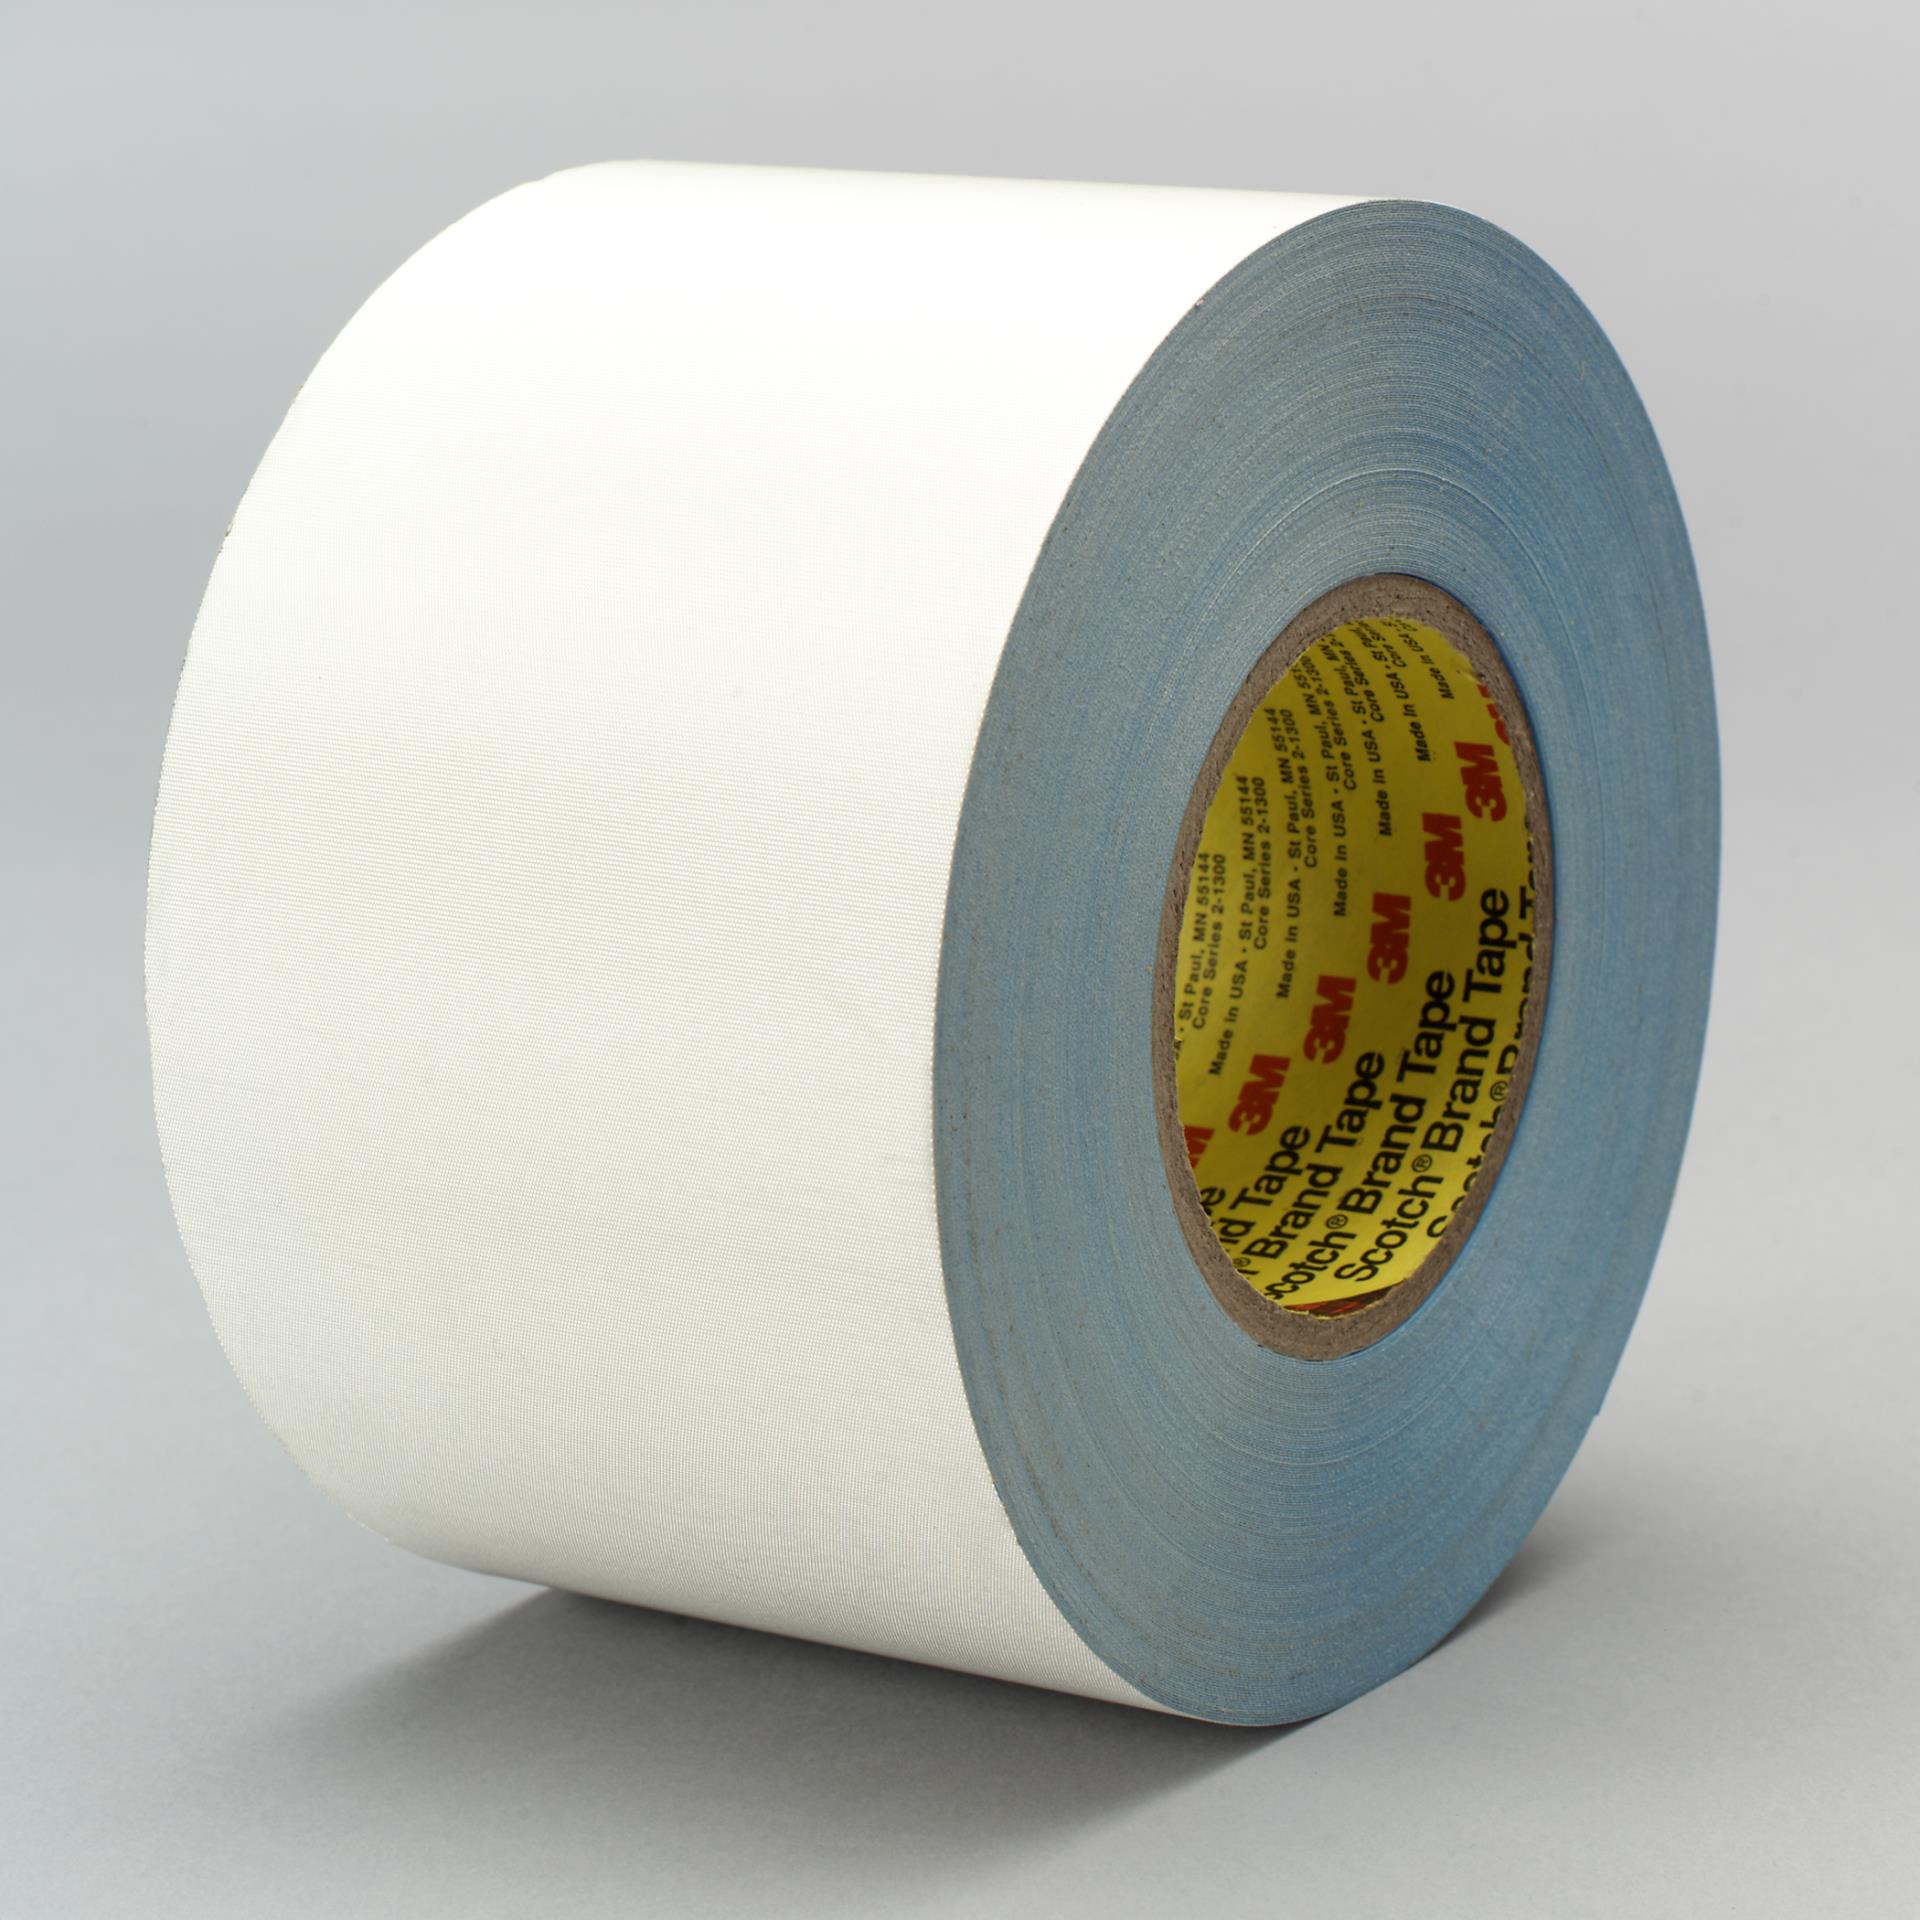 3M Electrically Conductive Double-Sided Tape 5113DFT-50, Grey, 25 mm x 10 M, 12 Rolls/Case